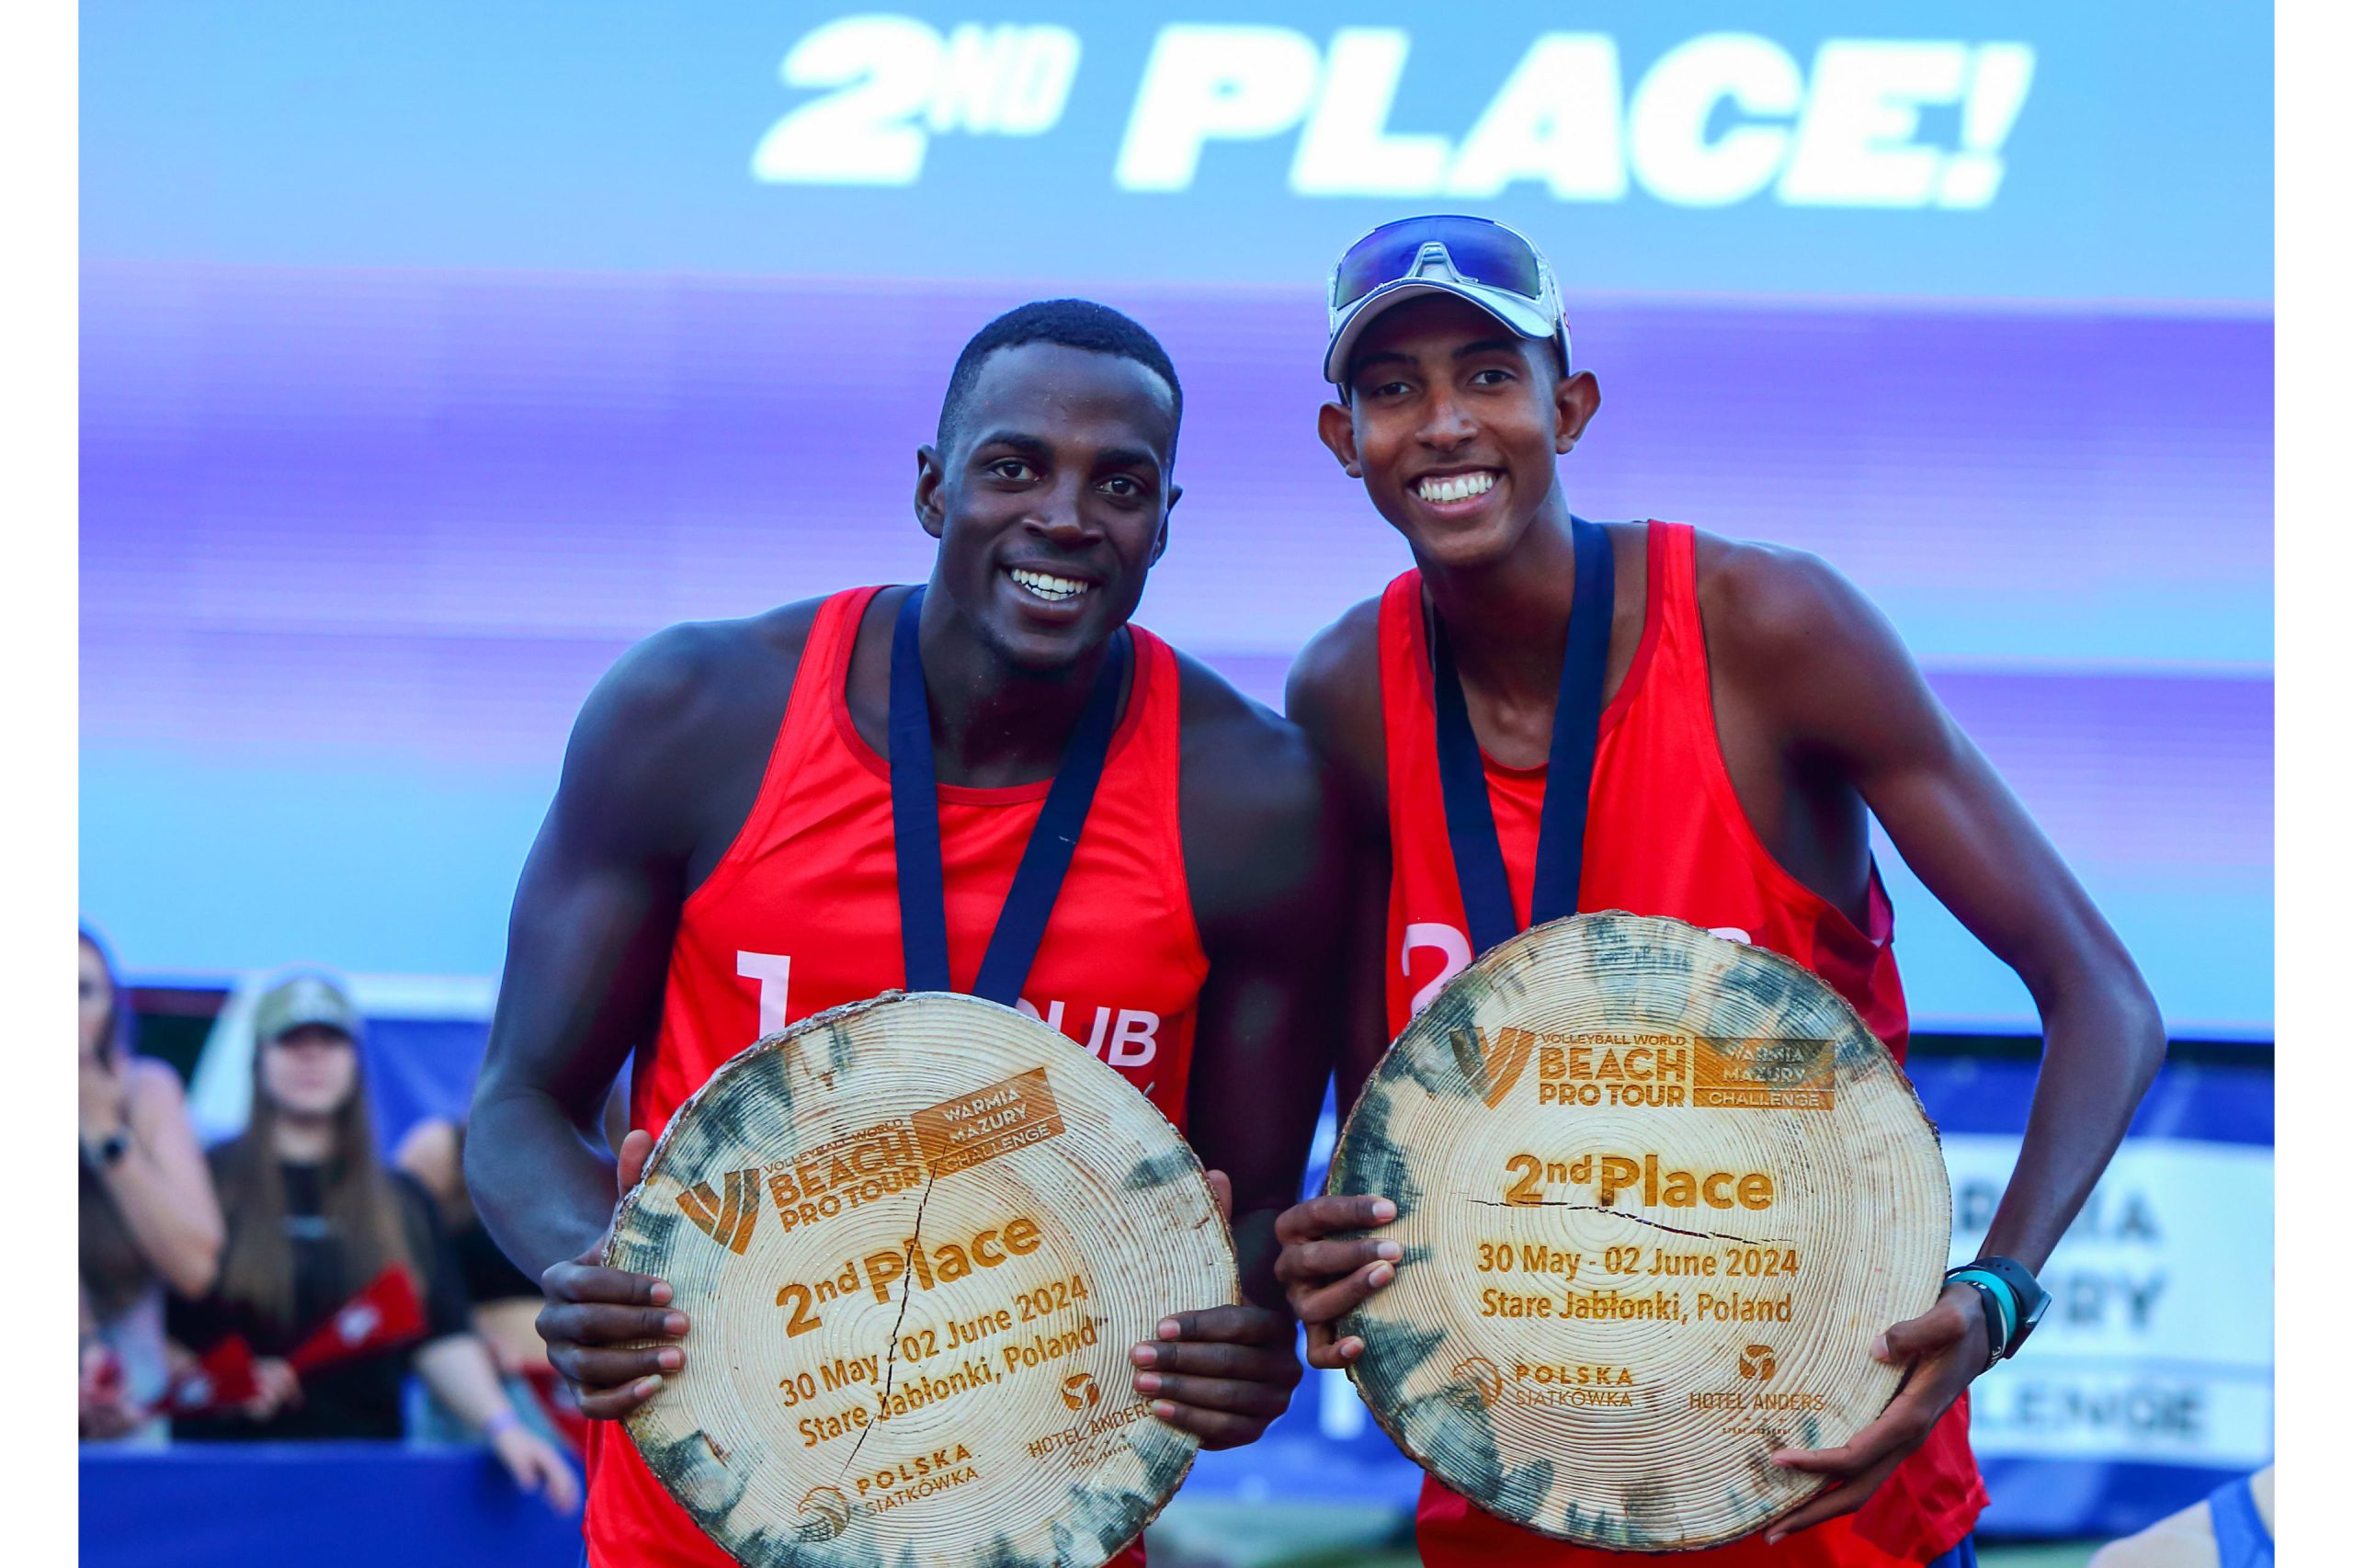 Alayo and Diaz Won Silver in Stare Jablonki and are in Olympic Qualification Zone